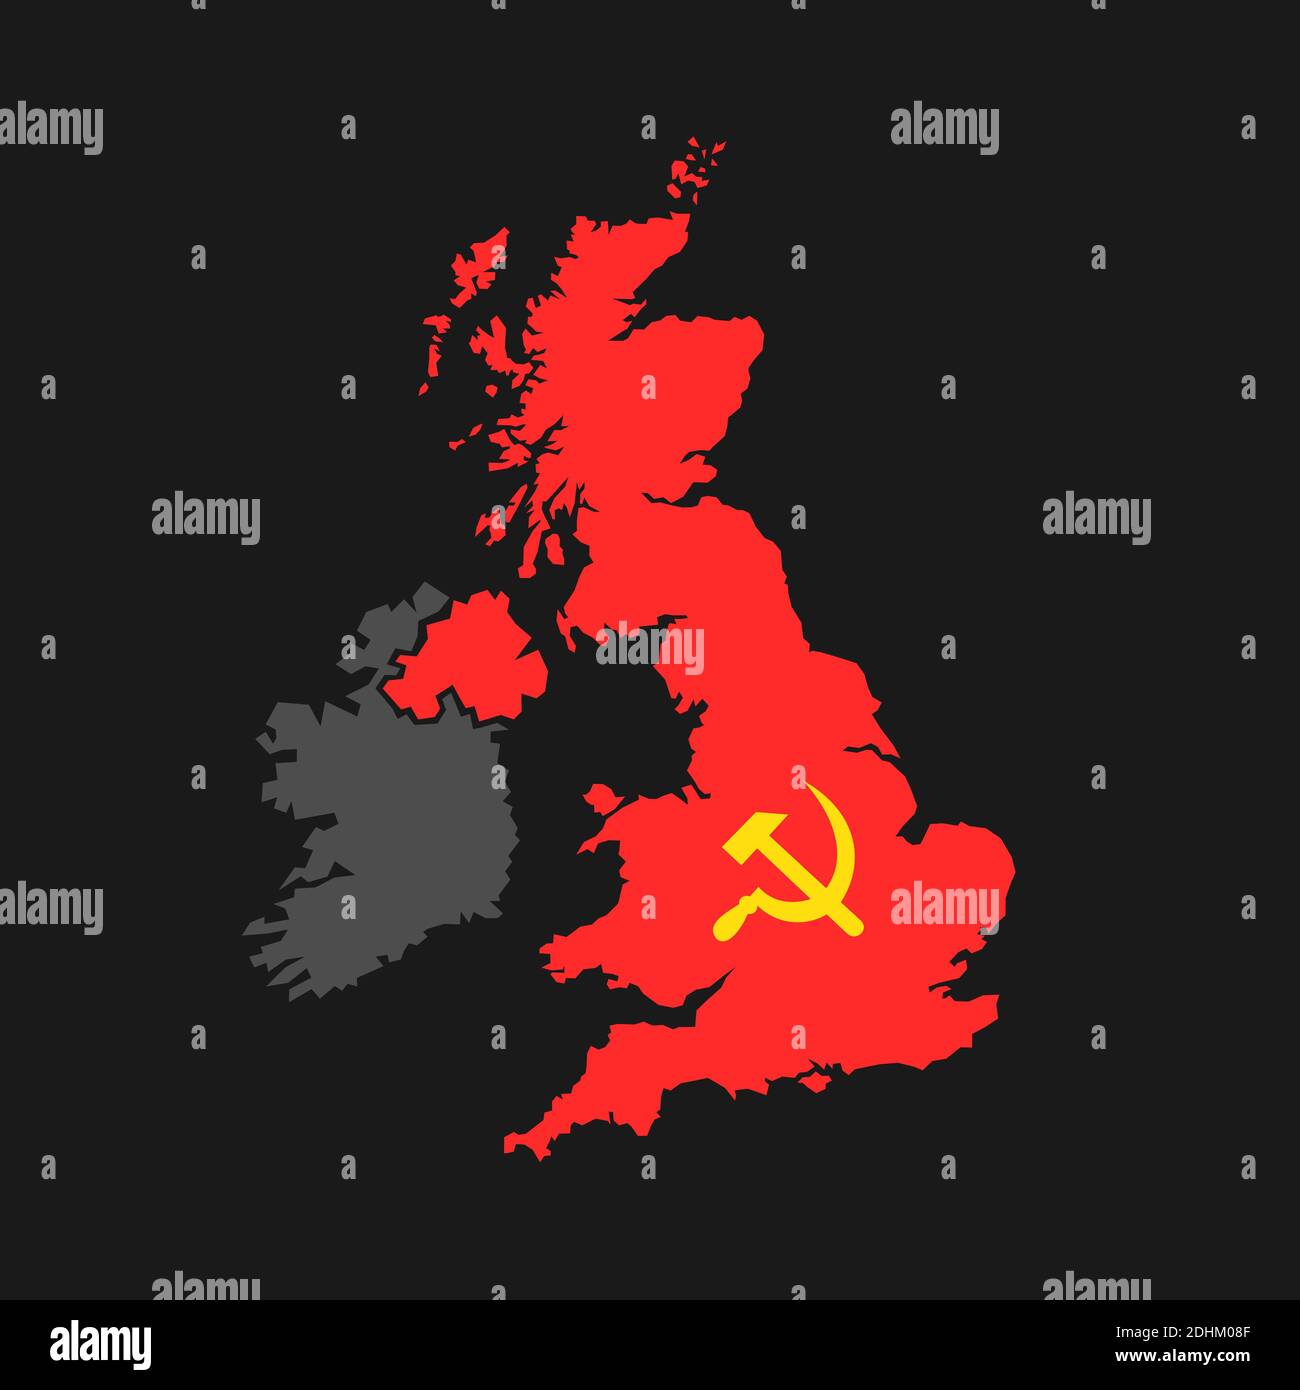 Socialism and communism in Great Gritain ( GB ) and United Kingdom ( UK ) - left and left-wing British politics and politician. Vector illustration of Stock Photo